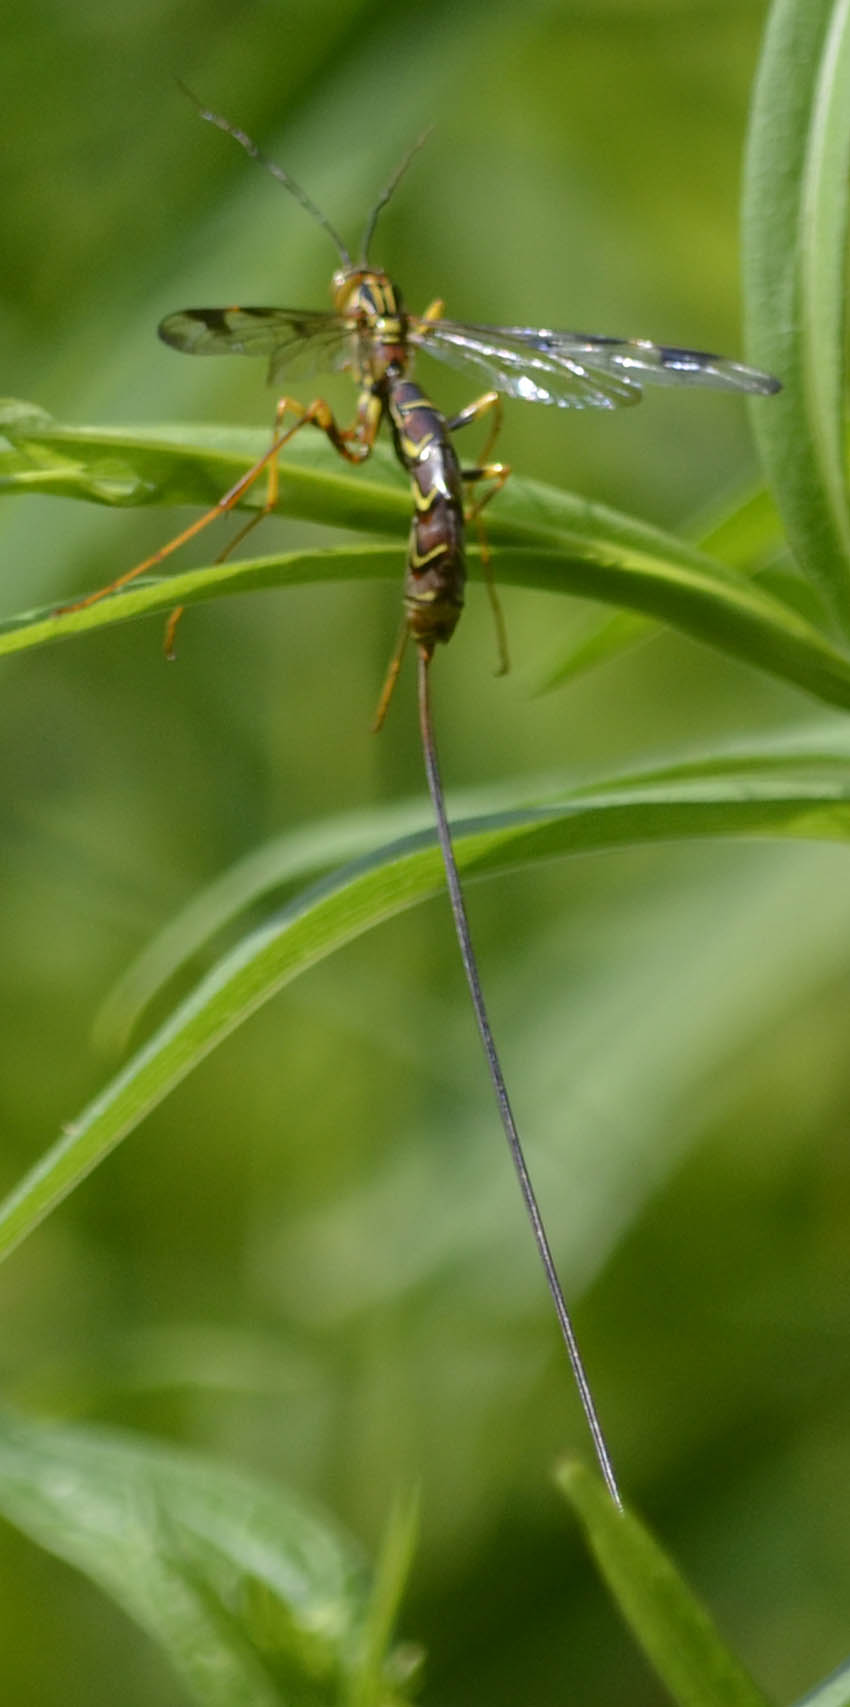 What Is This Wasp With a 4 Inch Long Thready Tail?